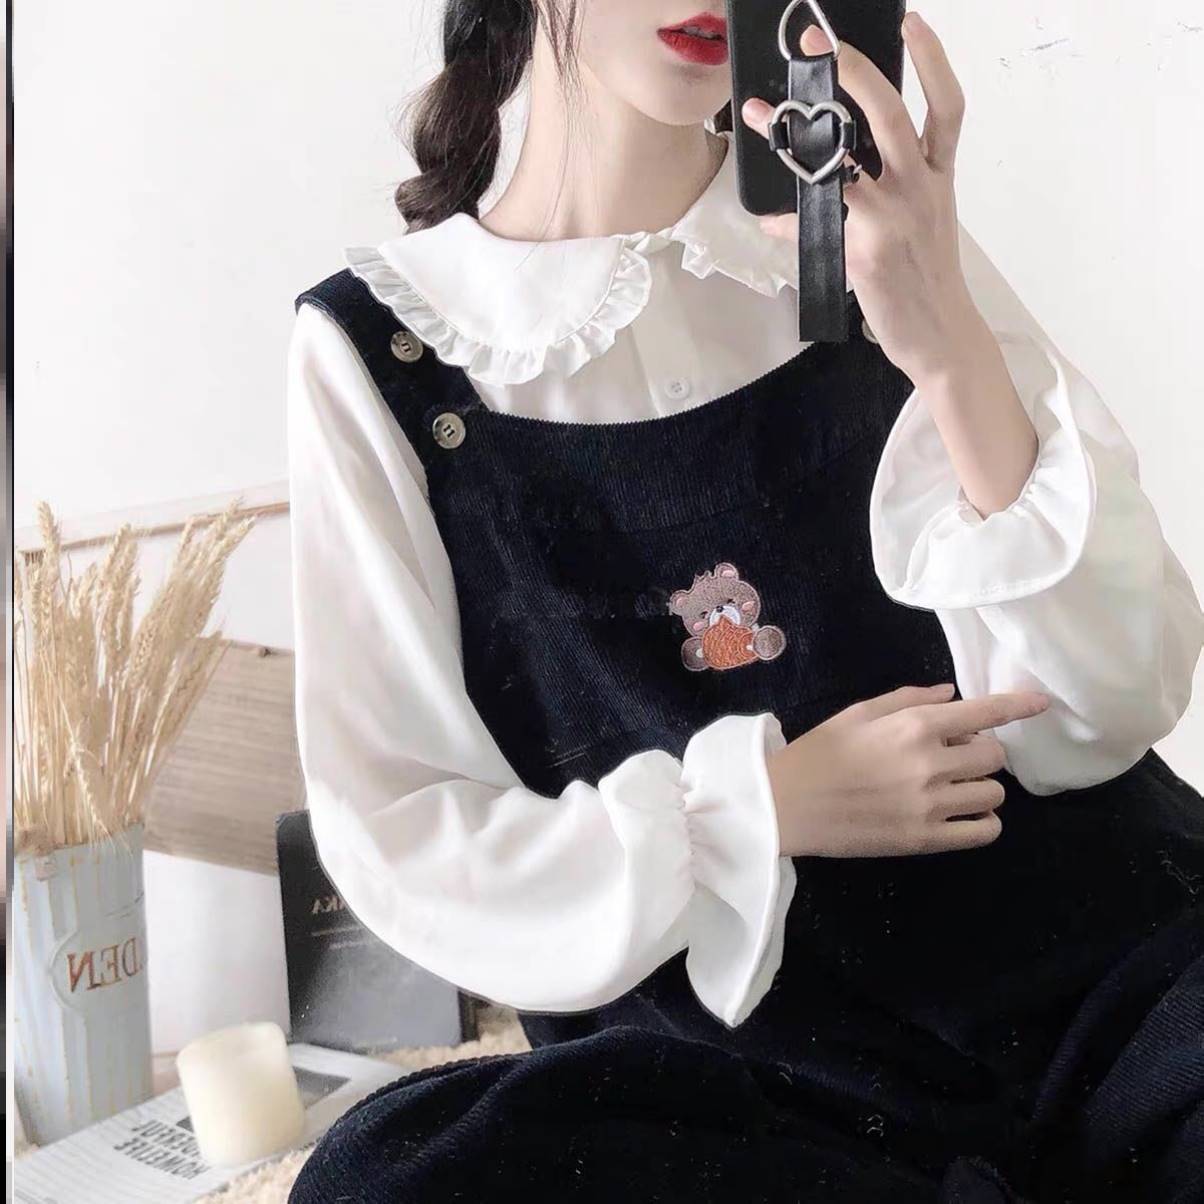 Japanese soft girl lovely student backing Lolita Lolita doll collar with Sen womens long sleeved shirt and blouse